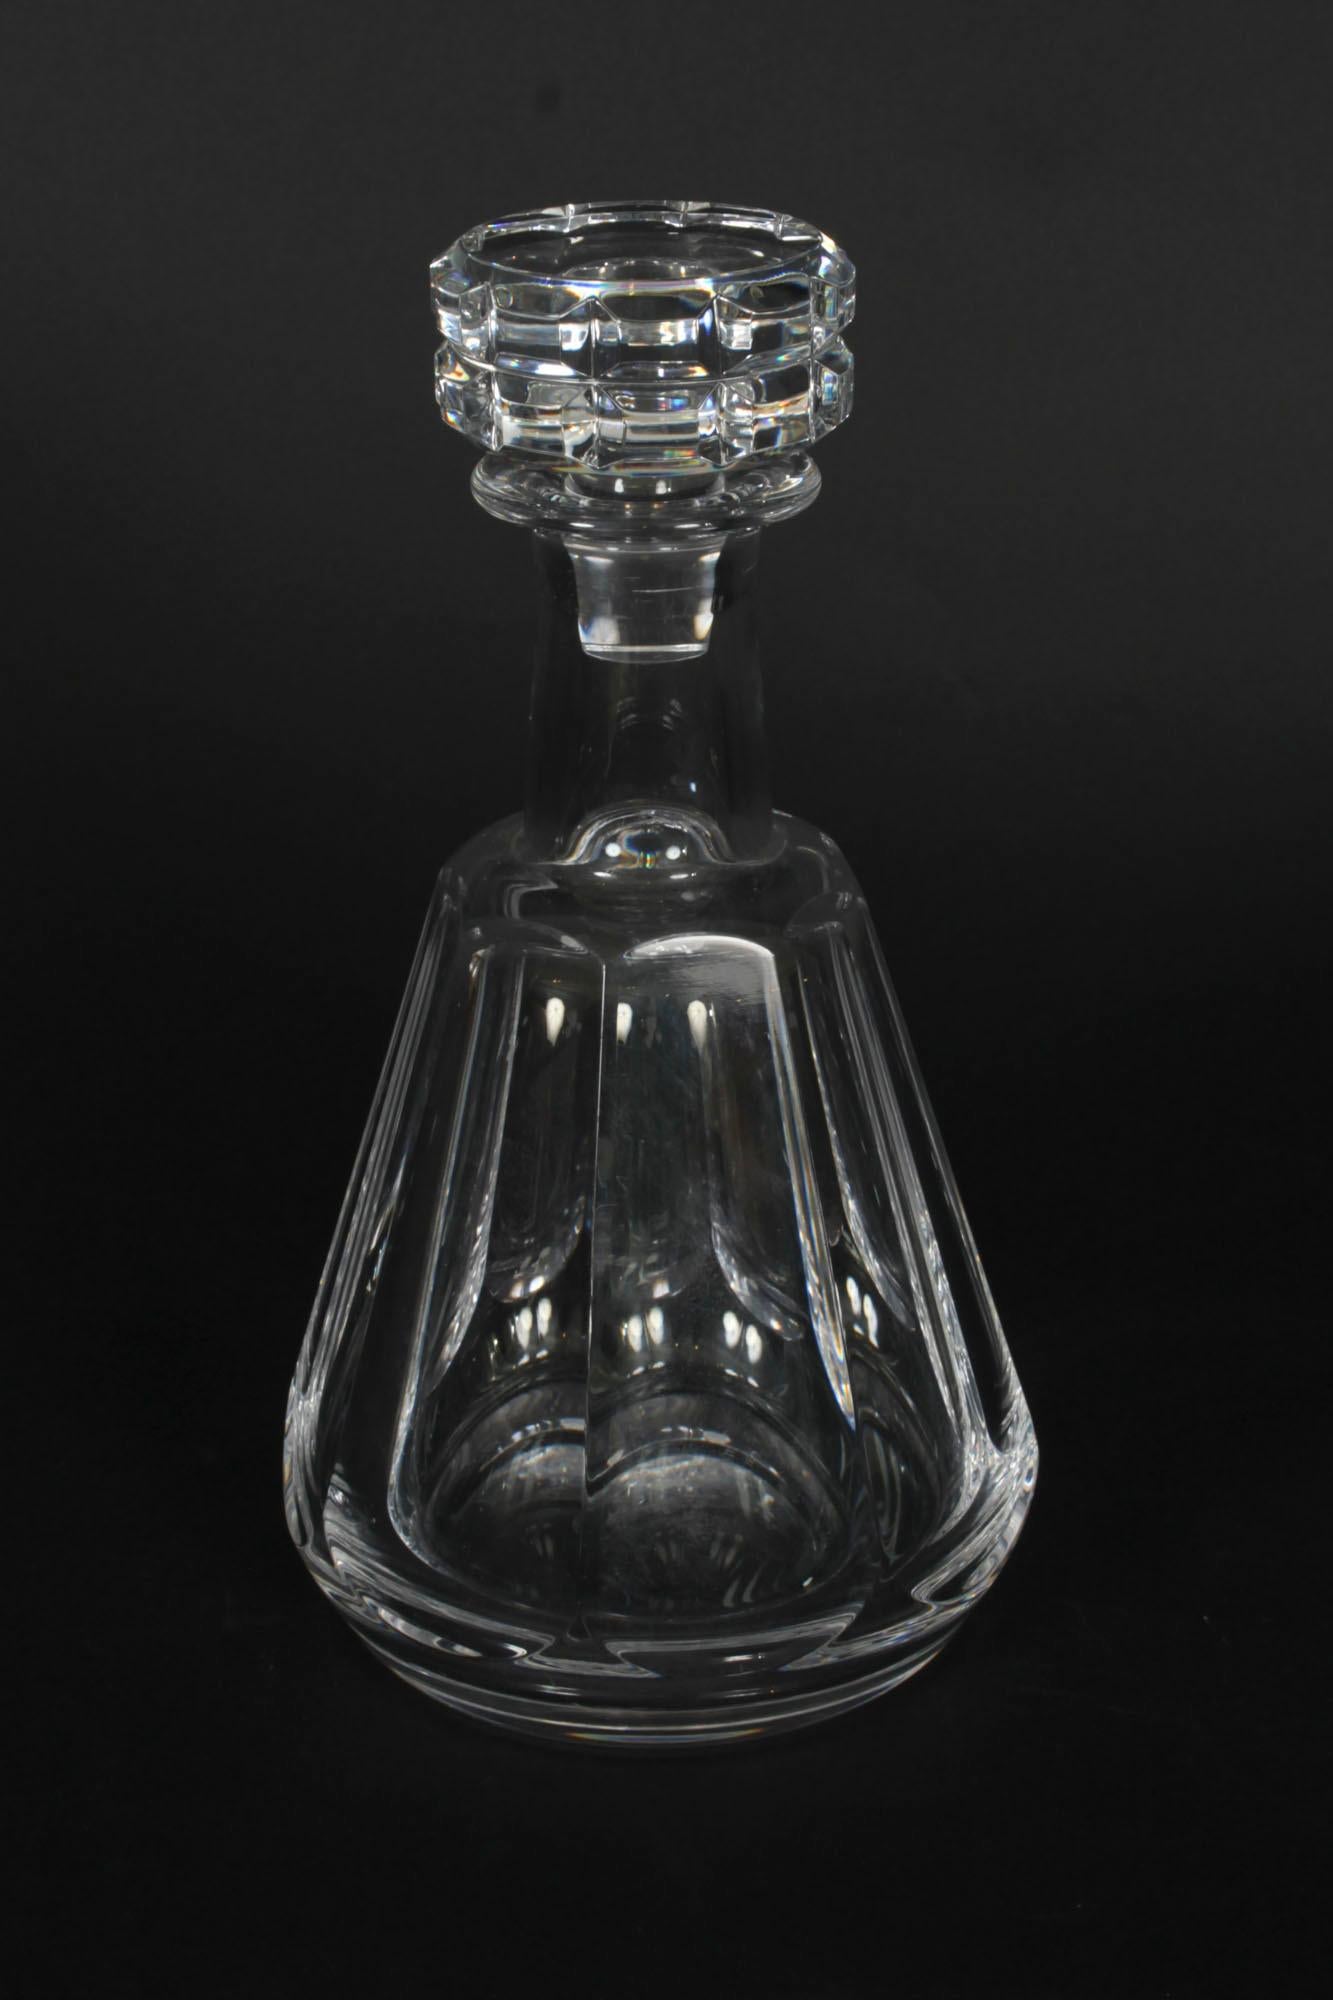 French Vintage Pair of Harcourt Talleyrand Crystal Decanters by Baccarat Mid 20th C For Sale